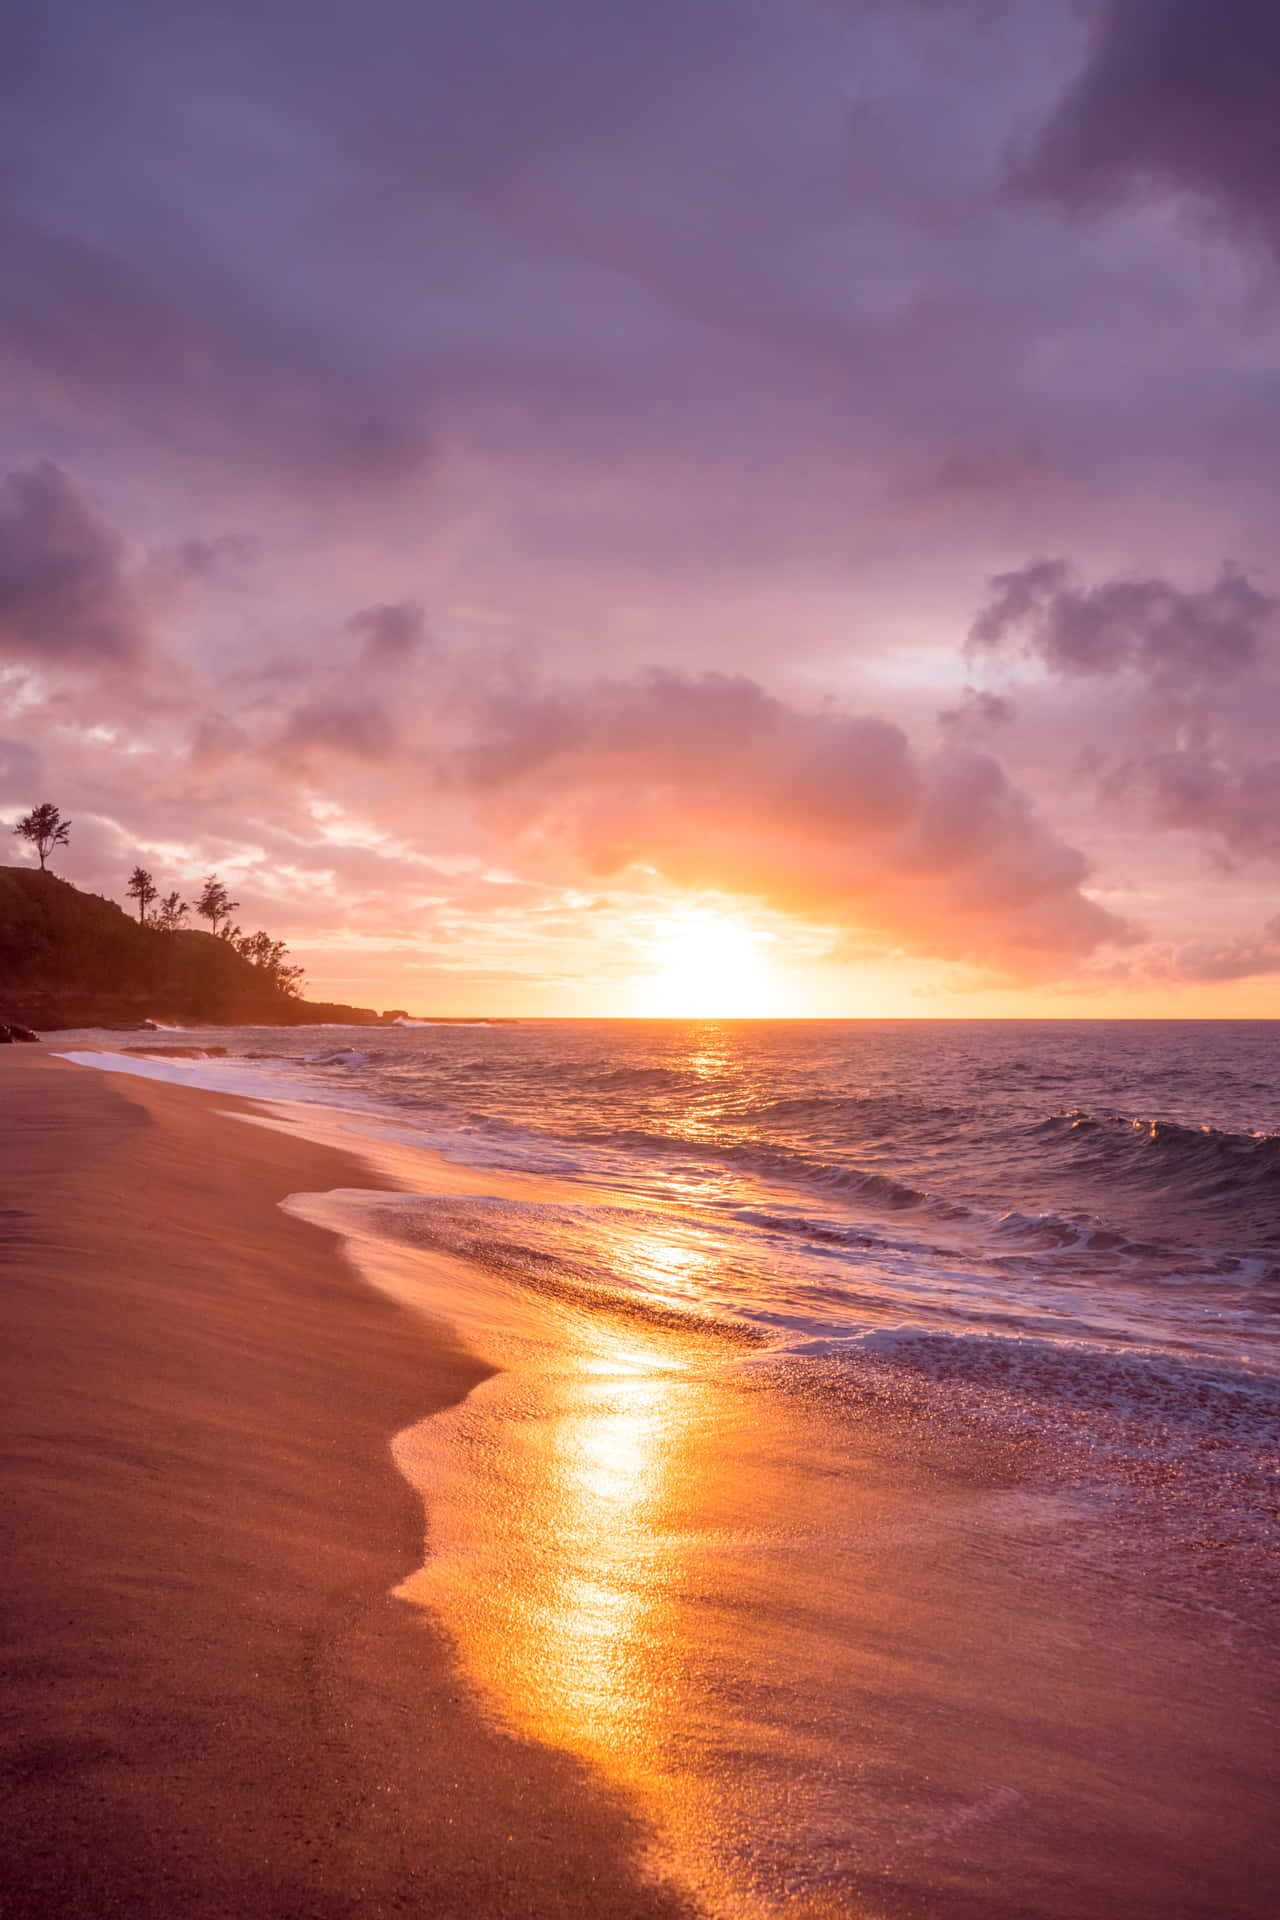 Soak in the views of a gorgeous beach sunset Wallpaper